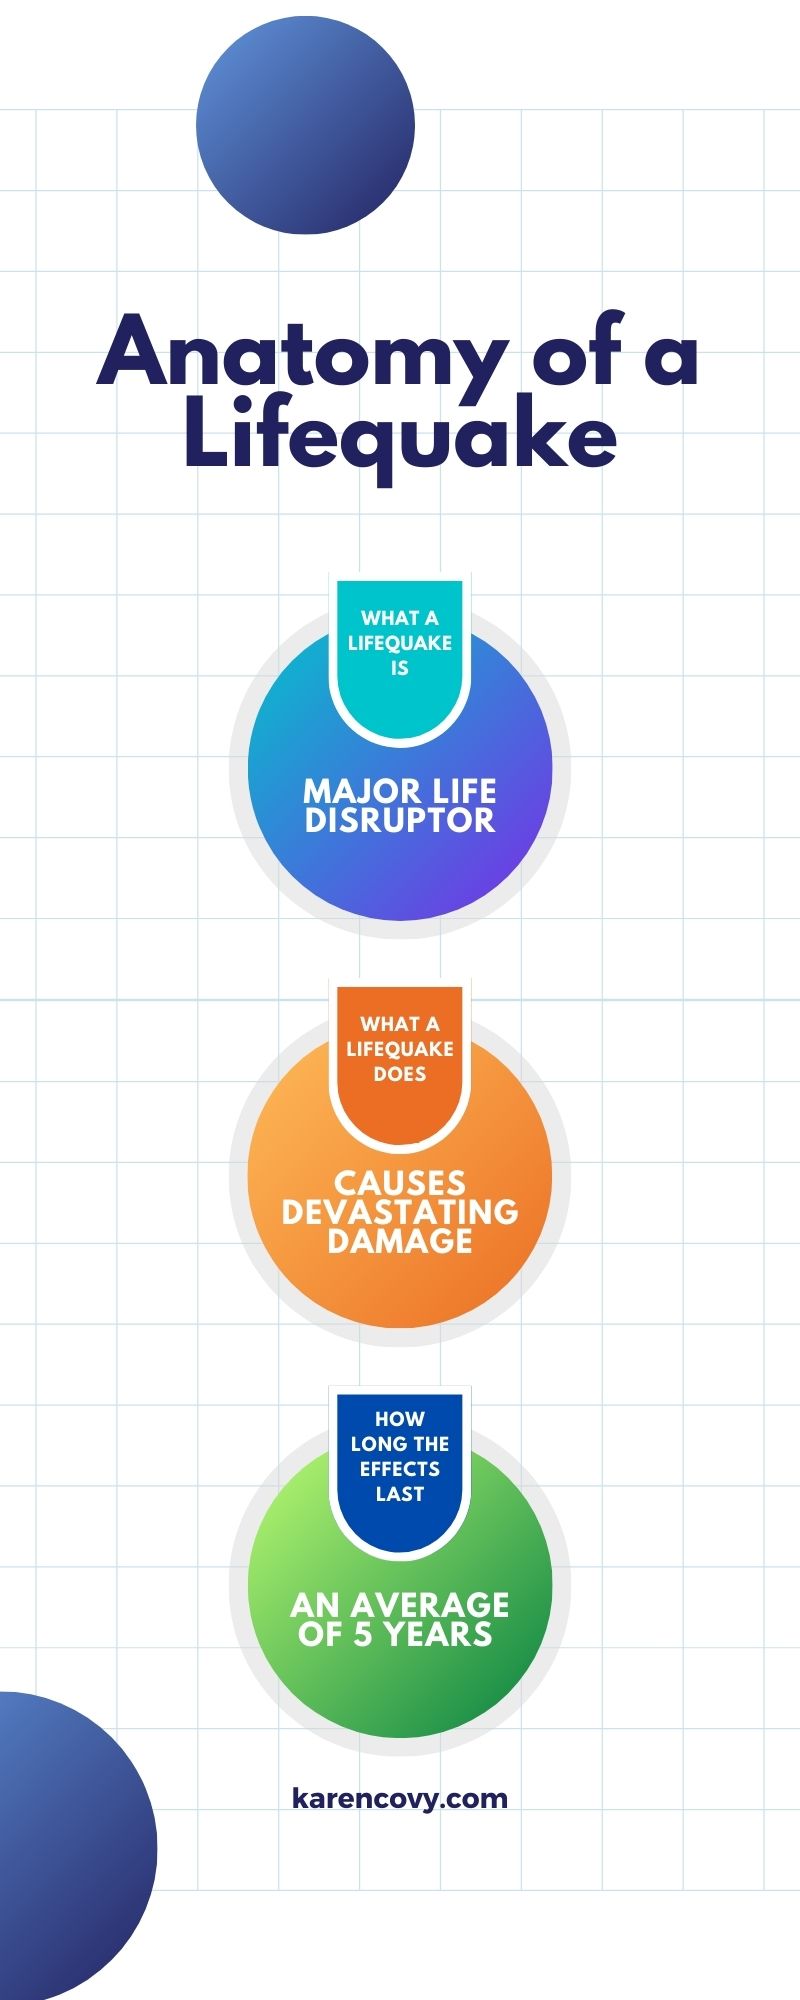 Infographic showing the 3 major characteristics of a lifequake.